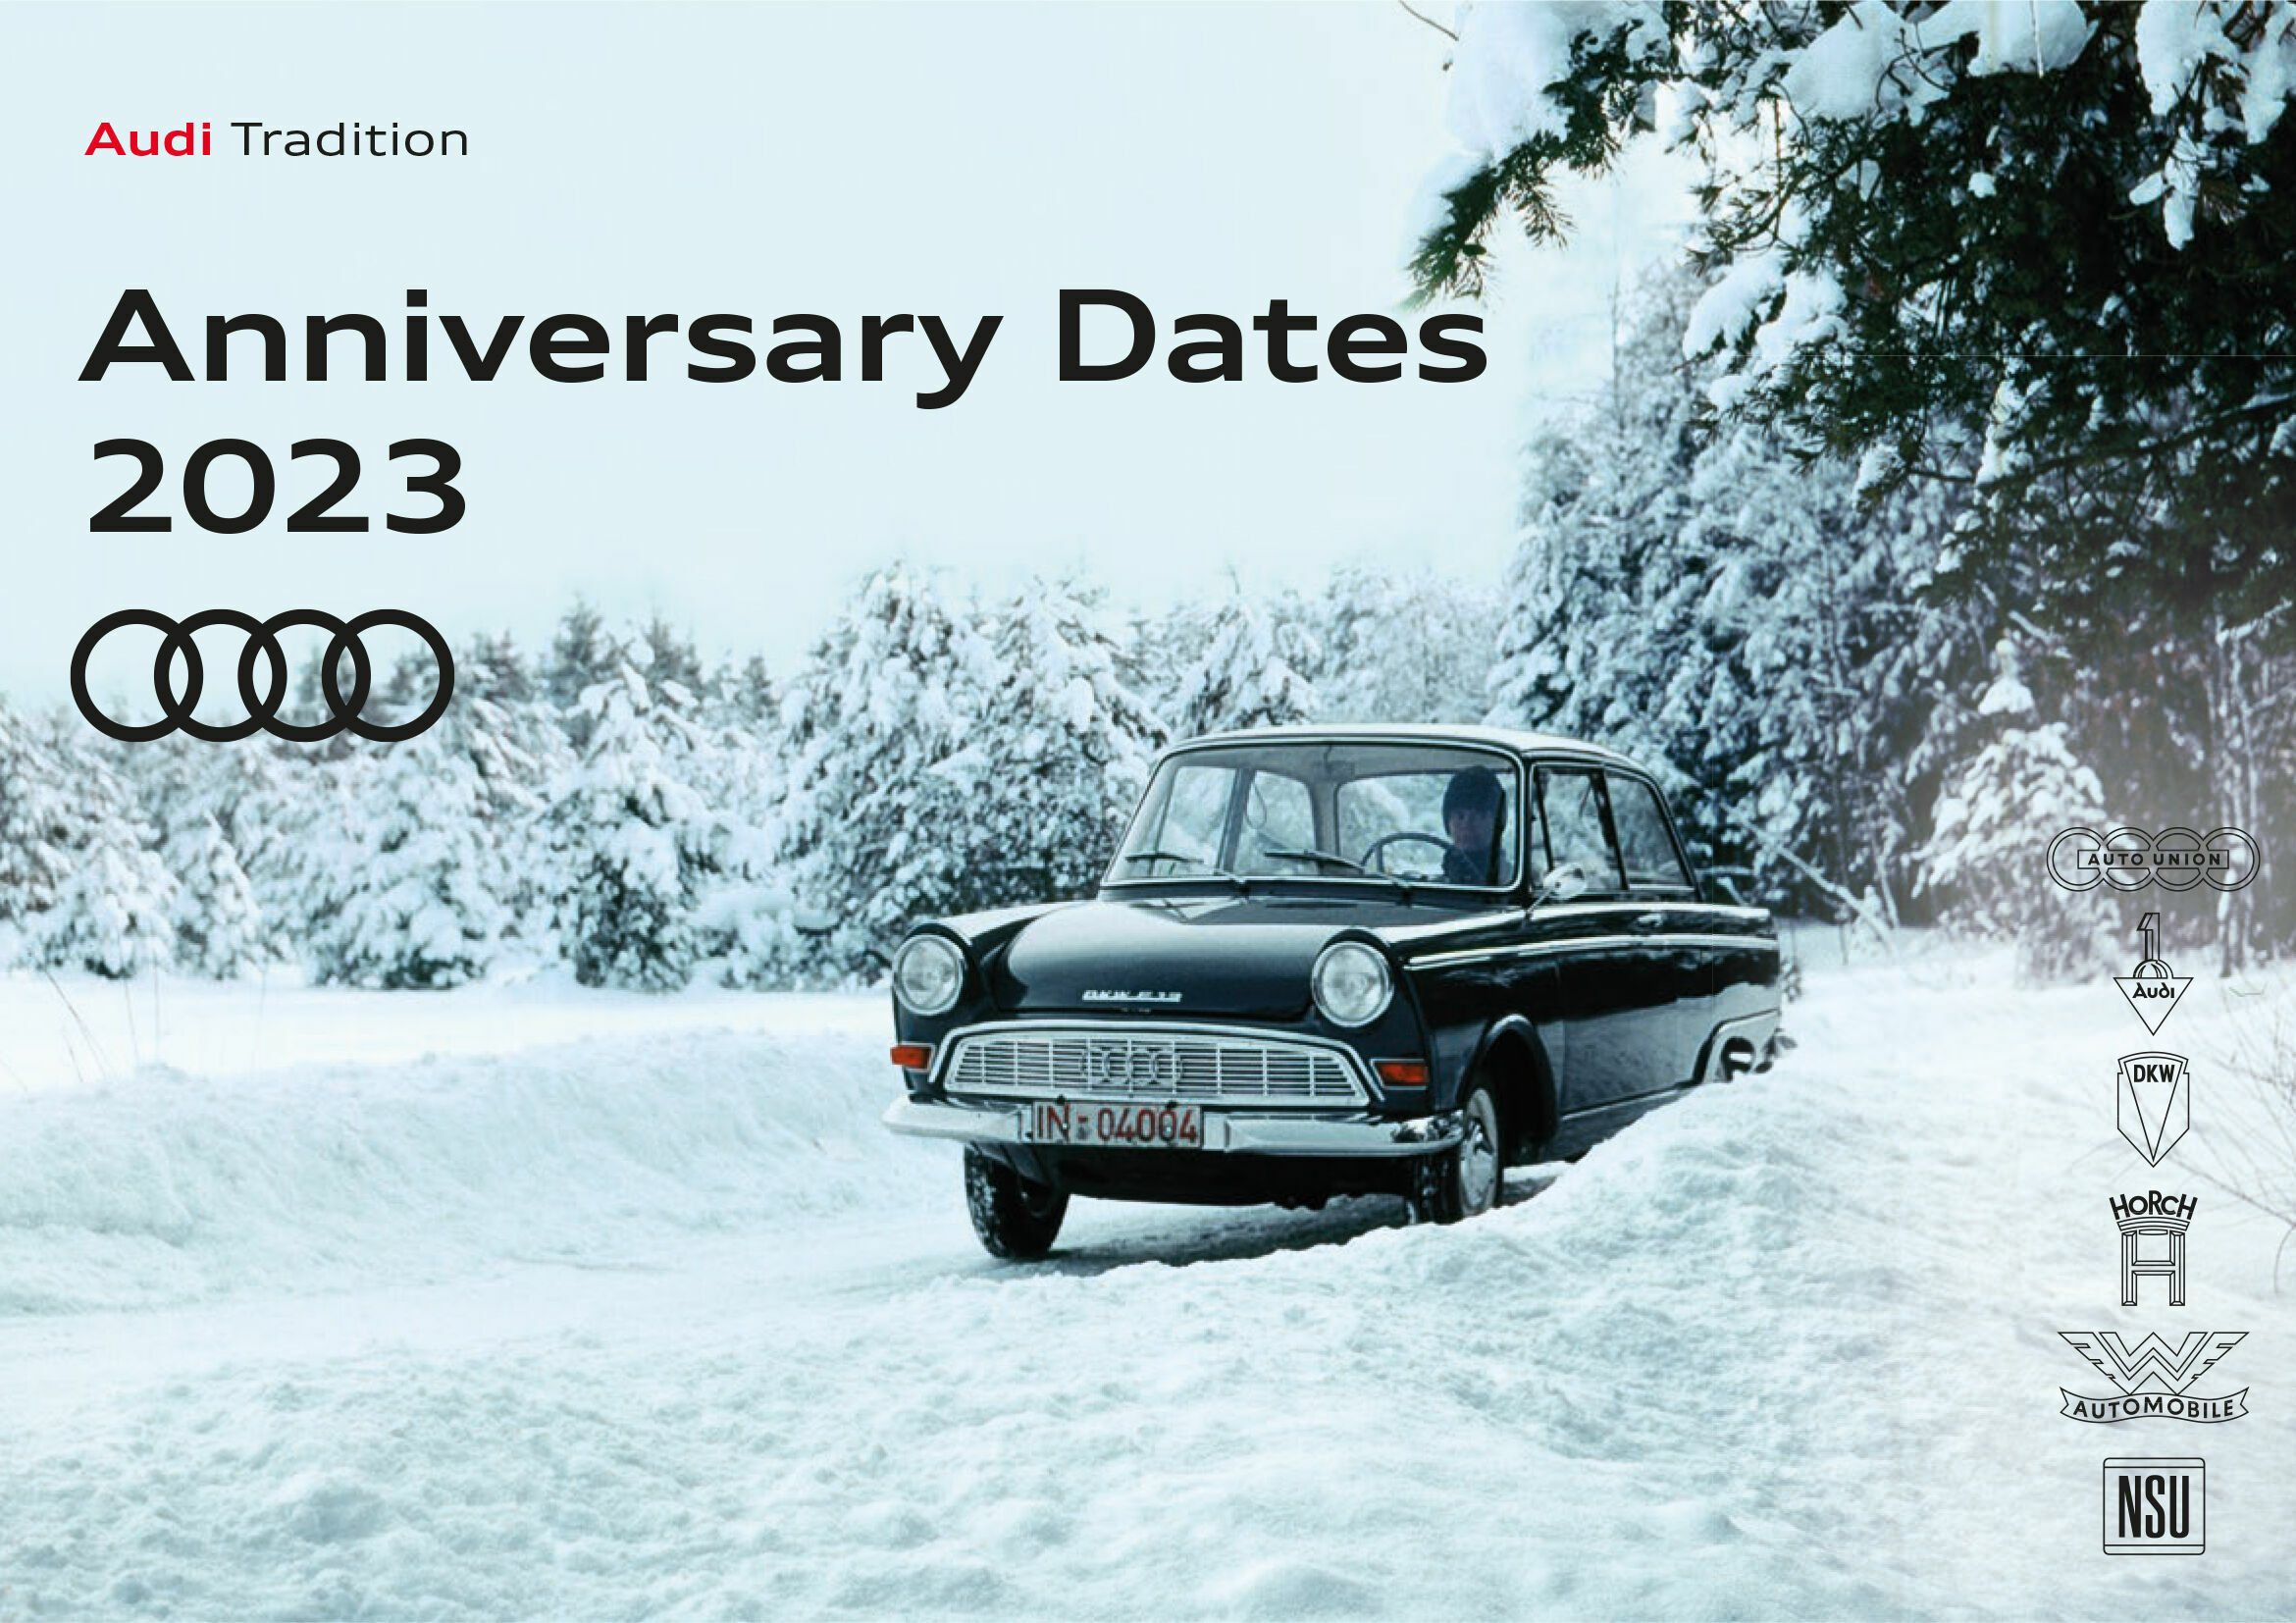 Audi Tradition: many anniversaries and events in 2023